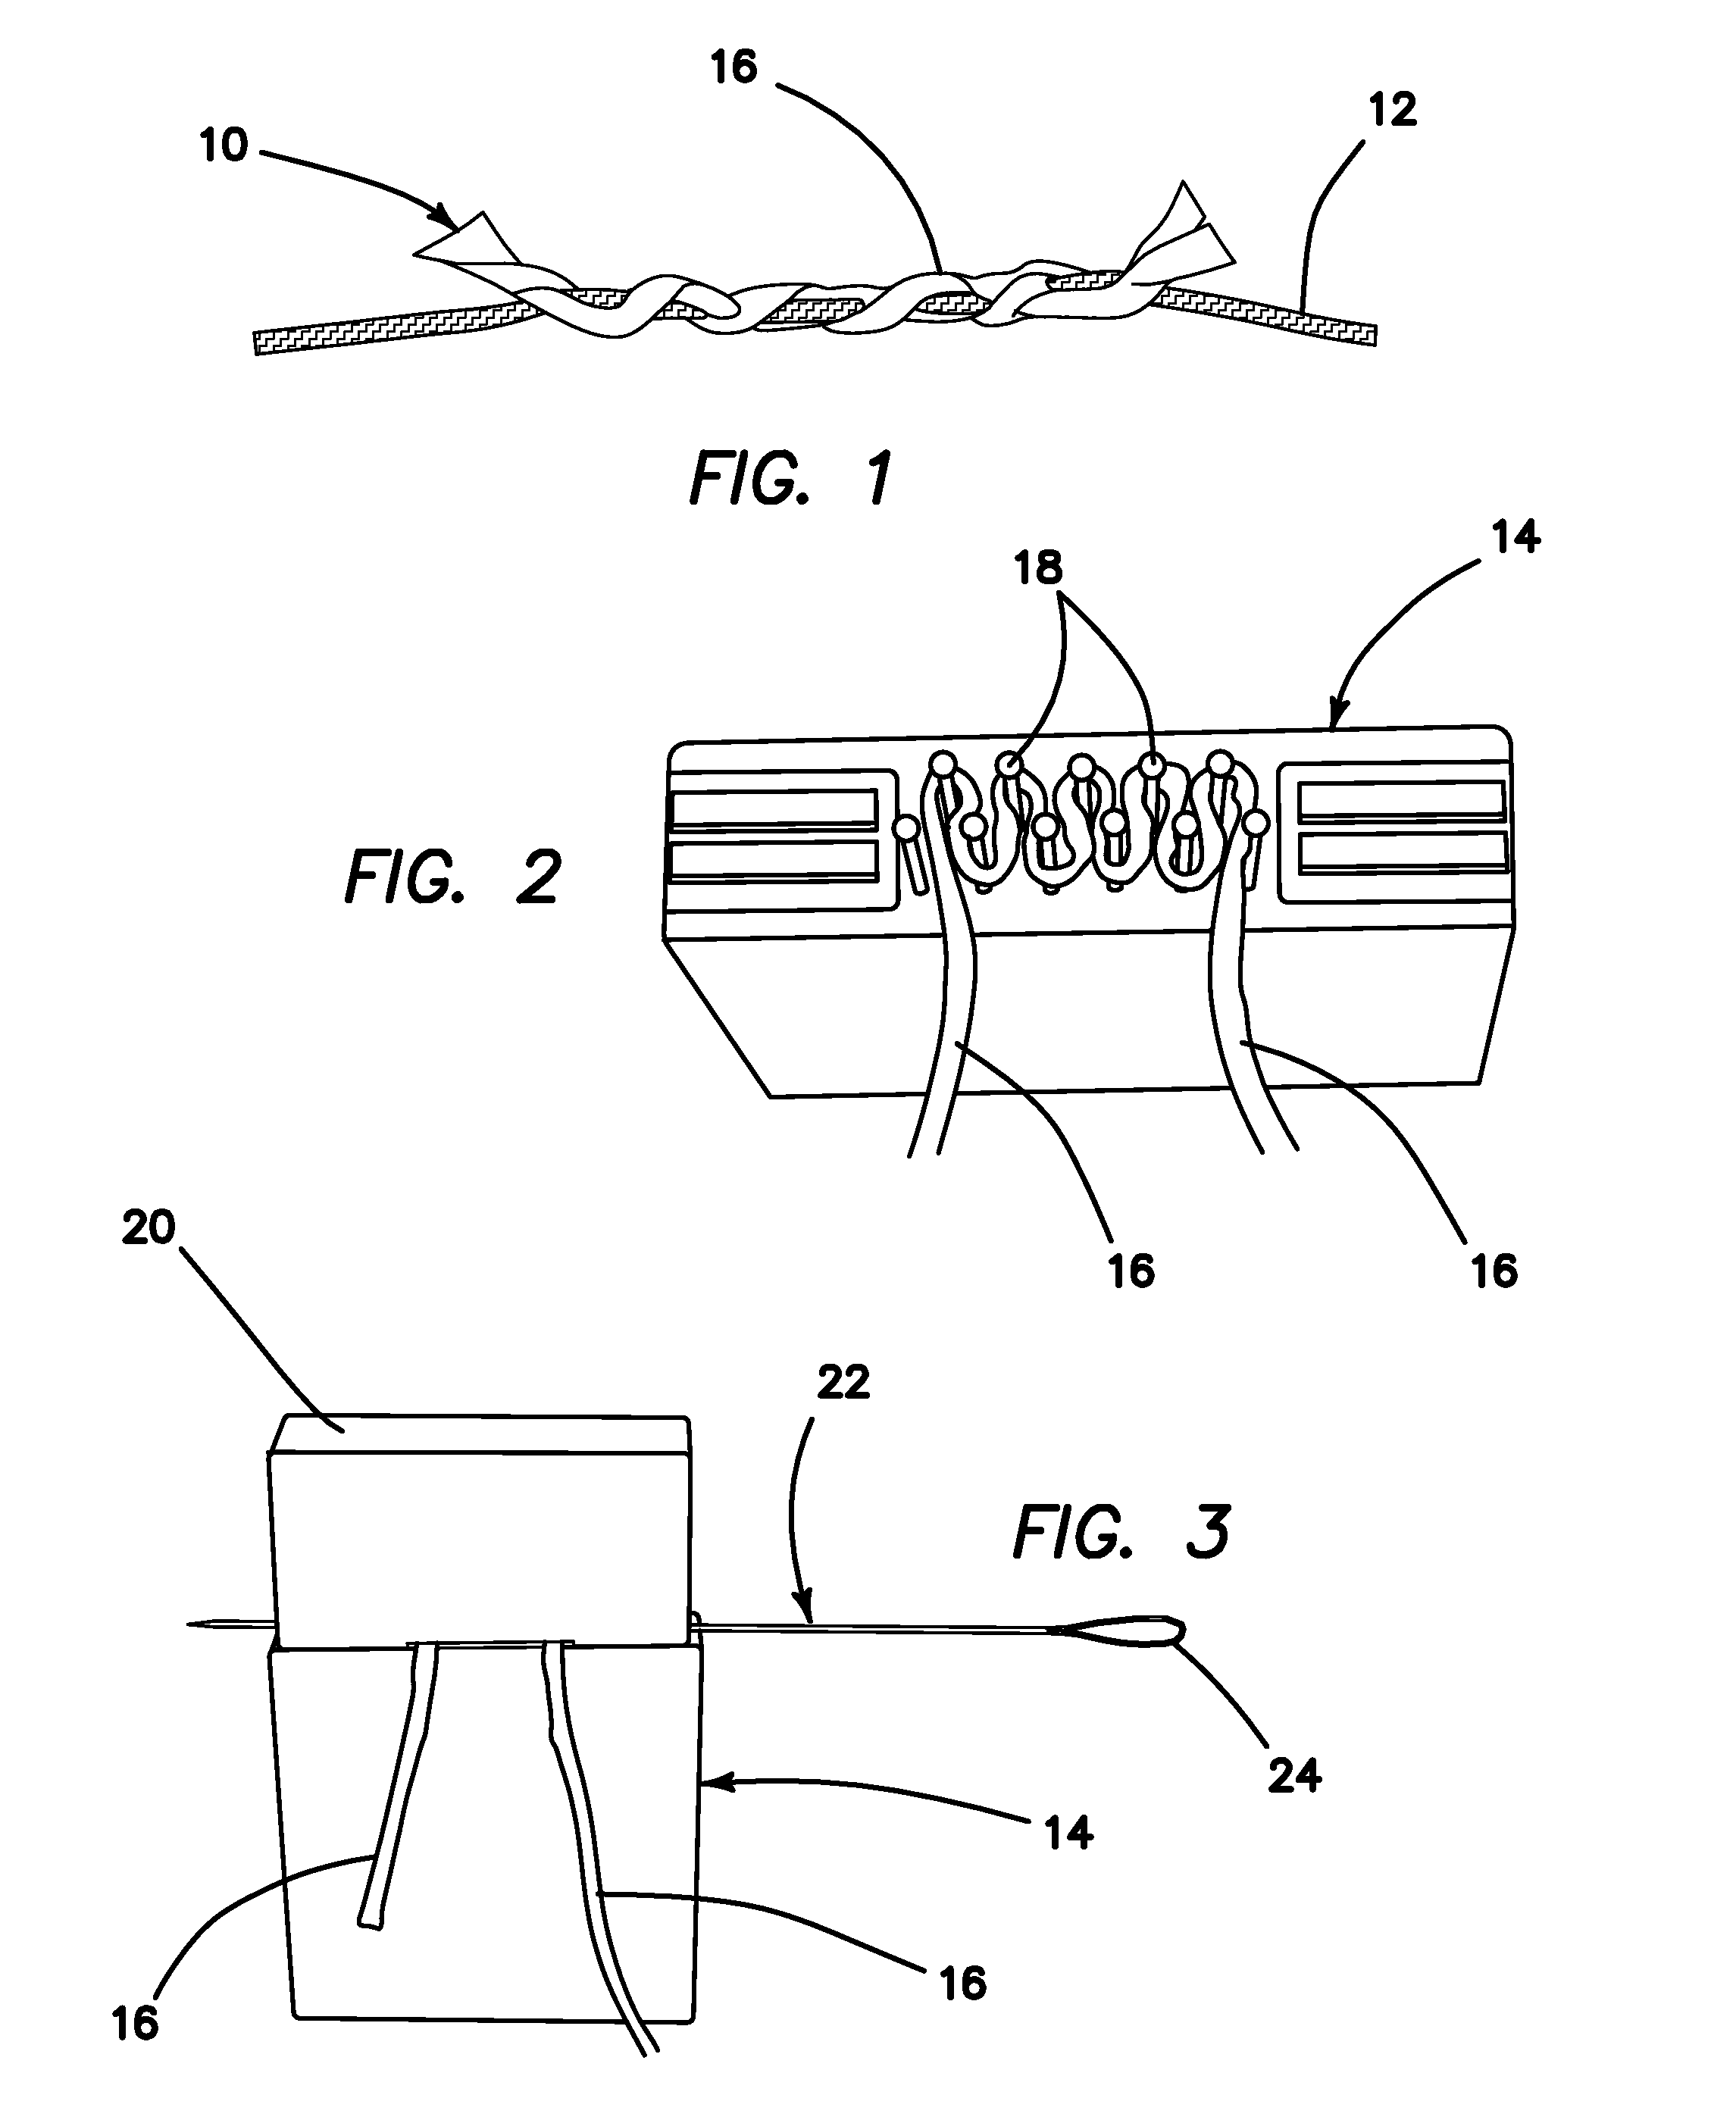 All-suture suture anchor systems and methods